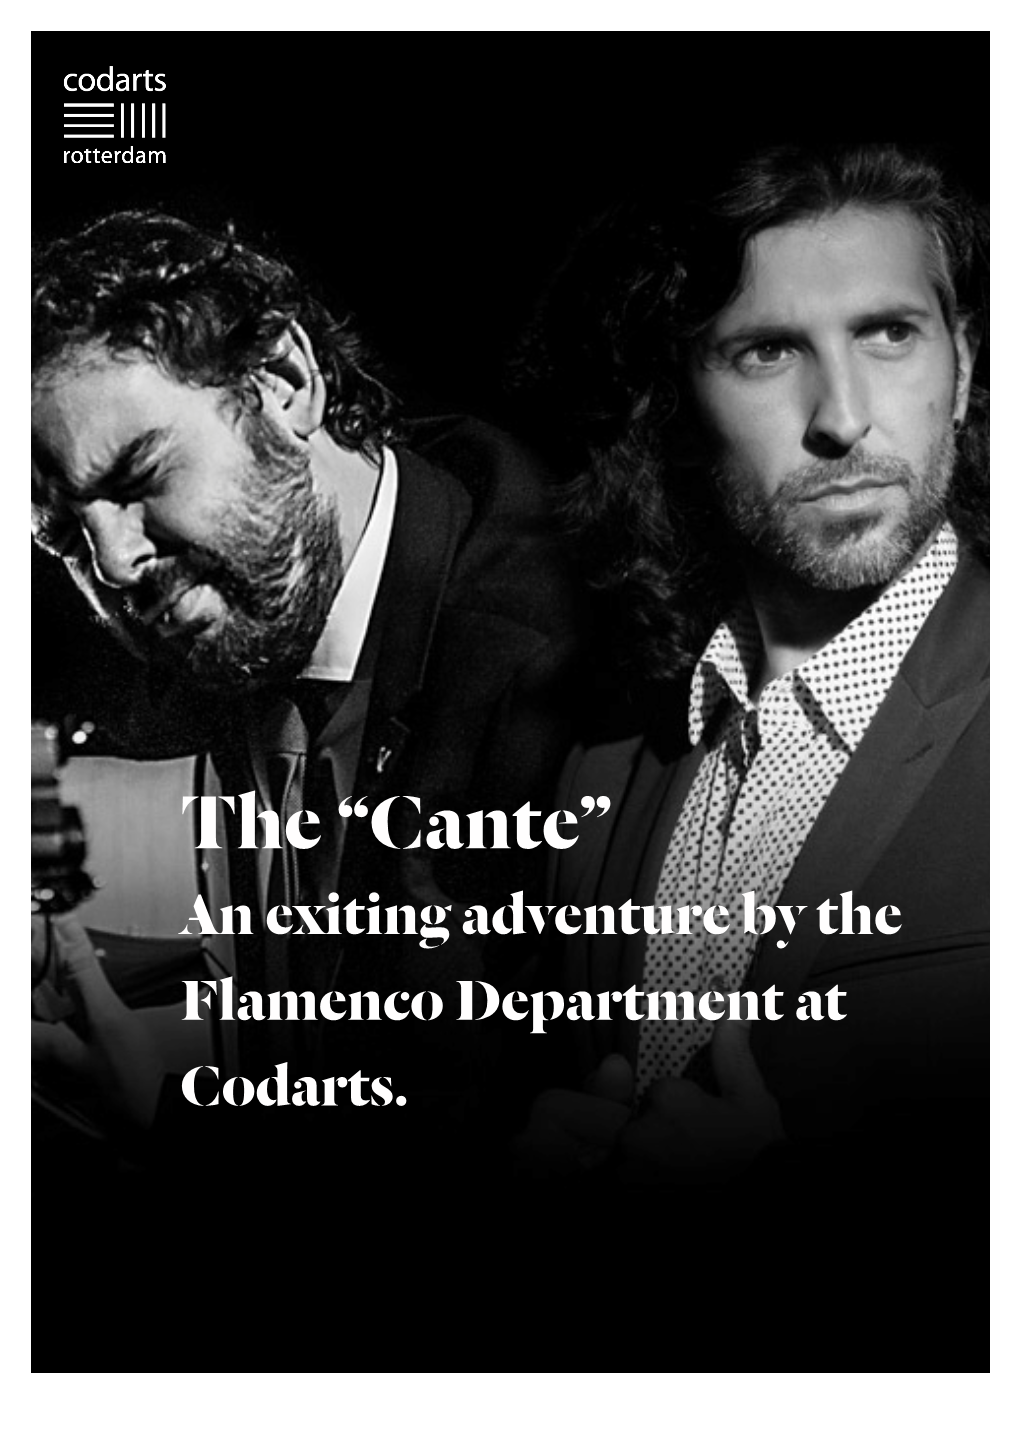 The “Cante” an Exiting Adventure by the Flamenco Department at Codarts